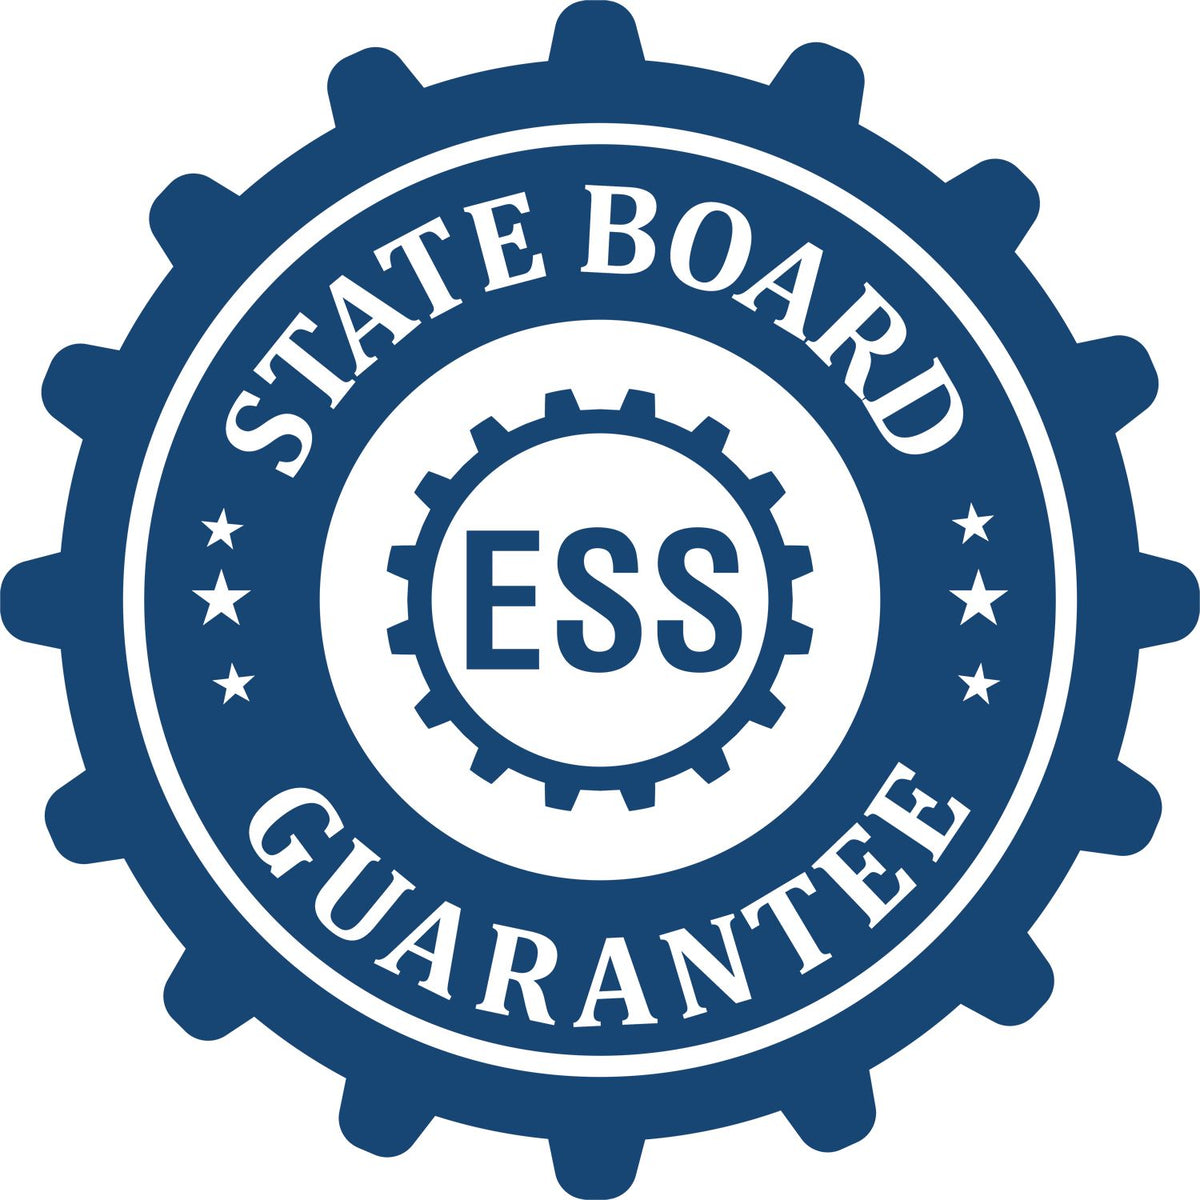 An emblem in a gear shape illustrating a state board guarantee for the Handheld Montana Land Surveyor Seal product.